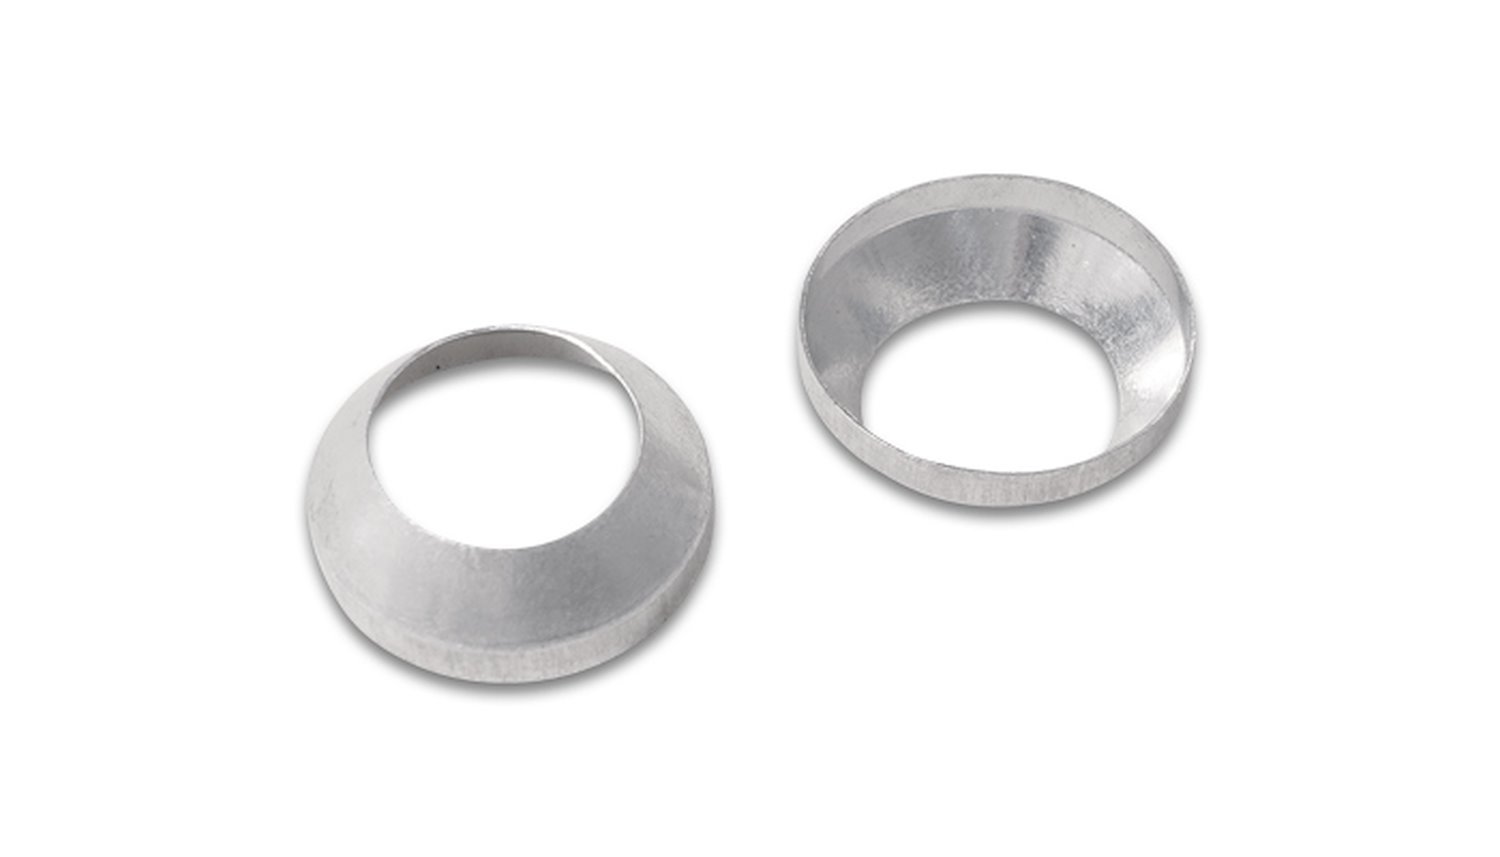 30 DEGREE CONICAL SEALS